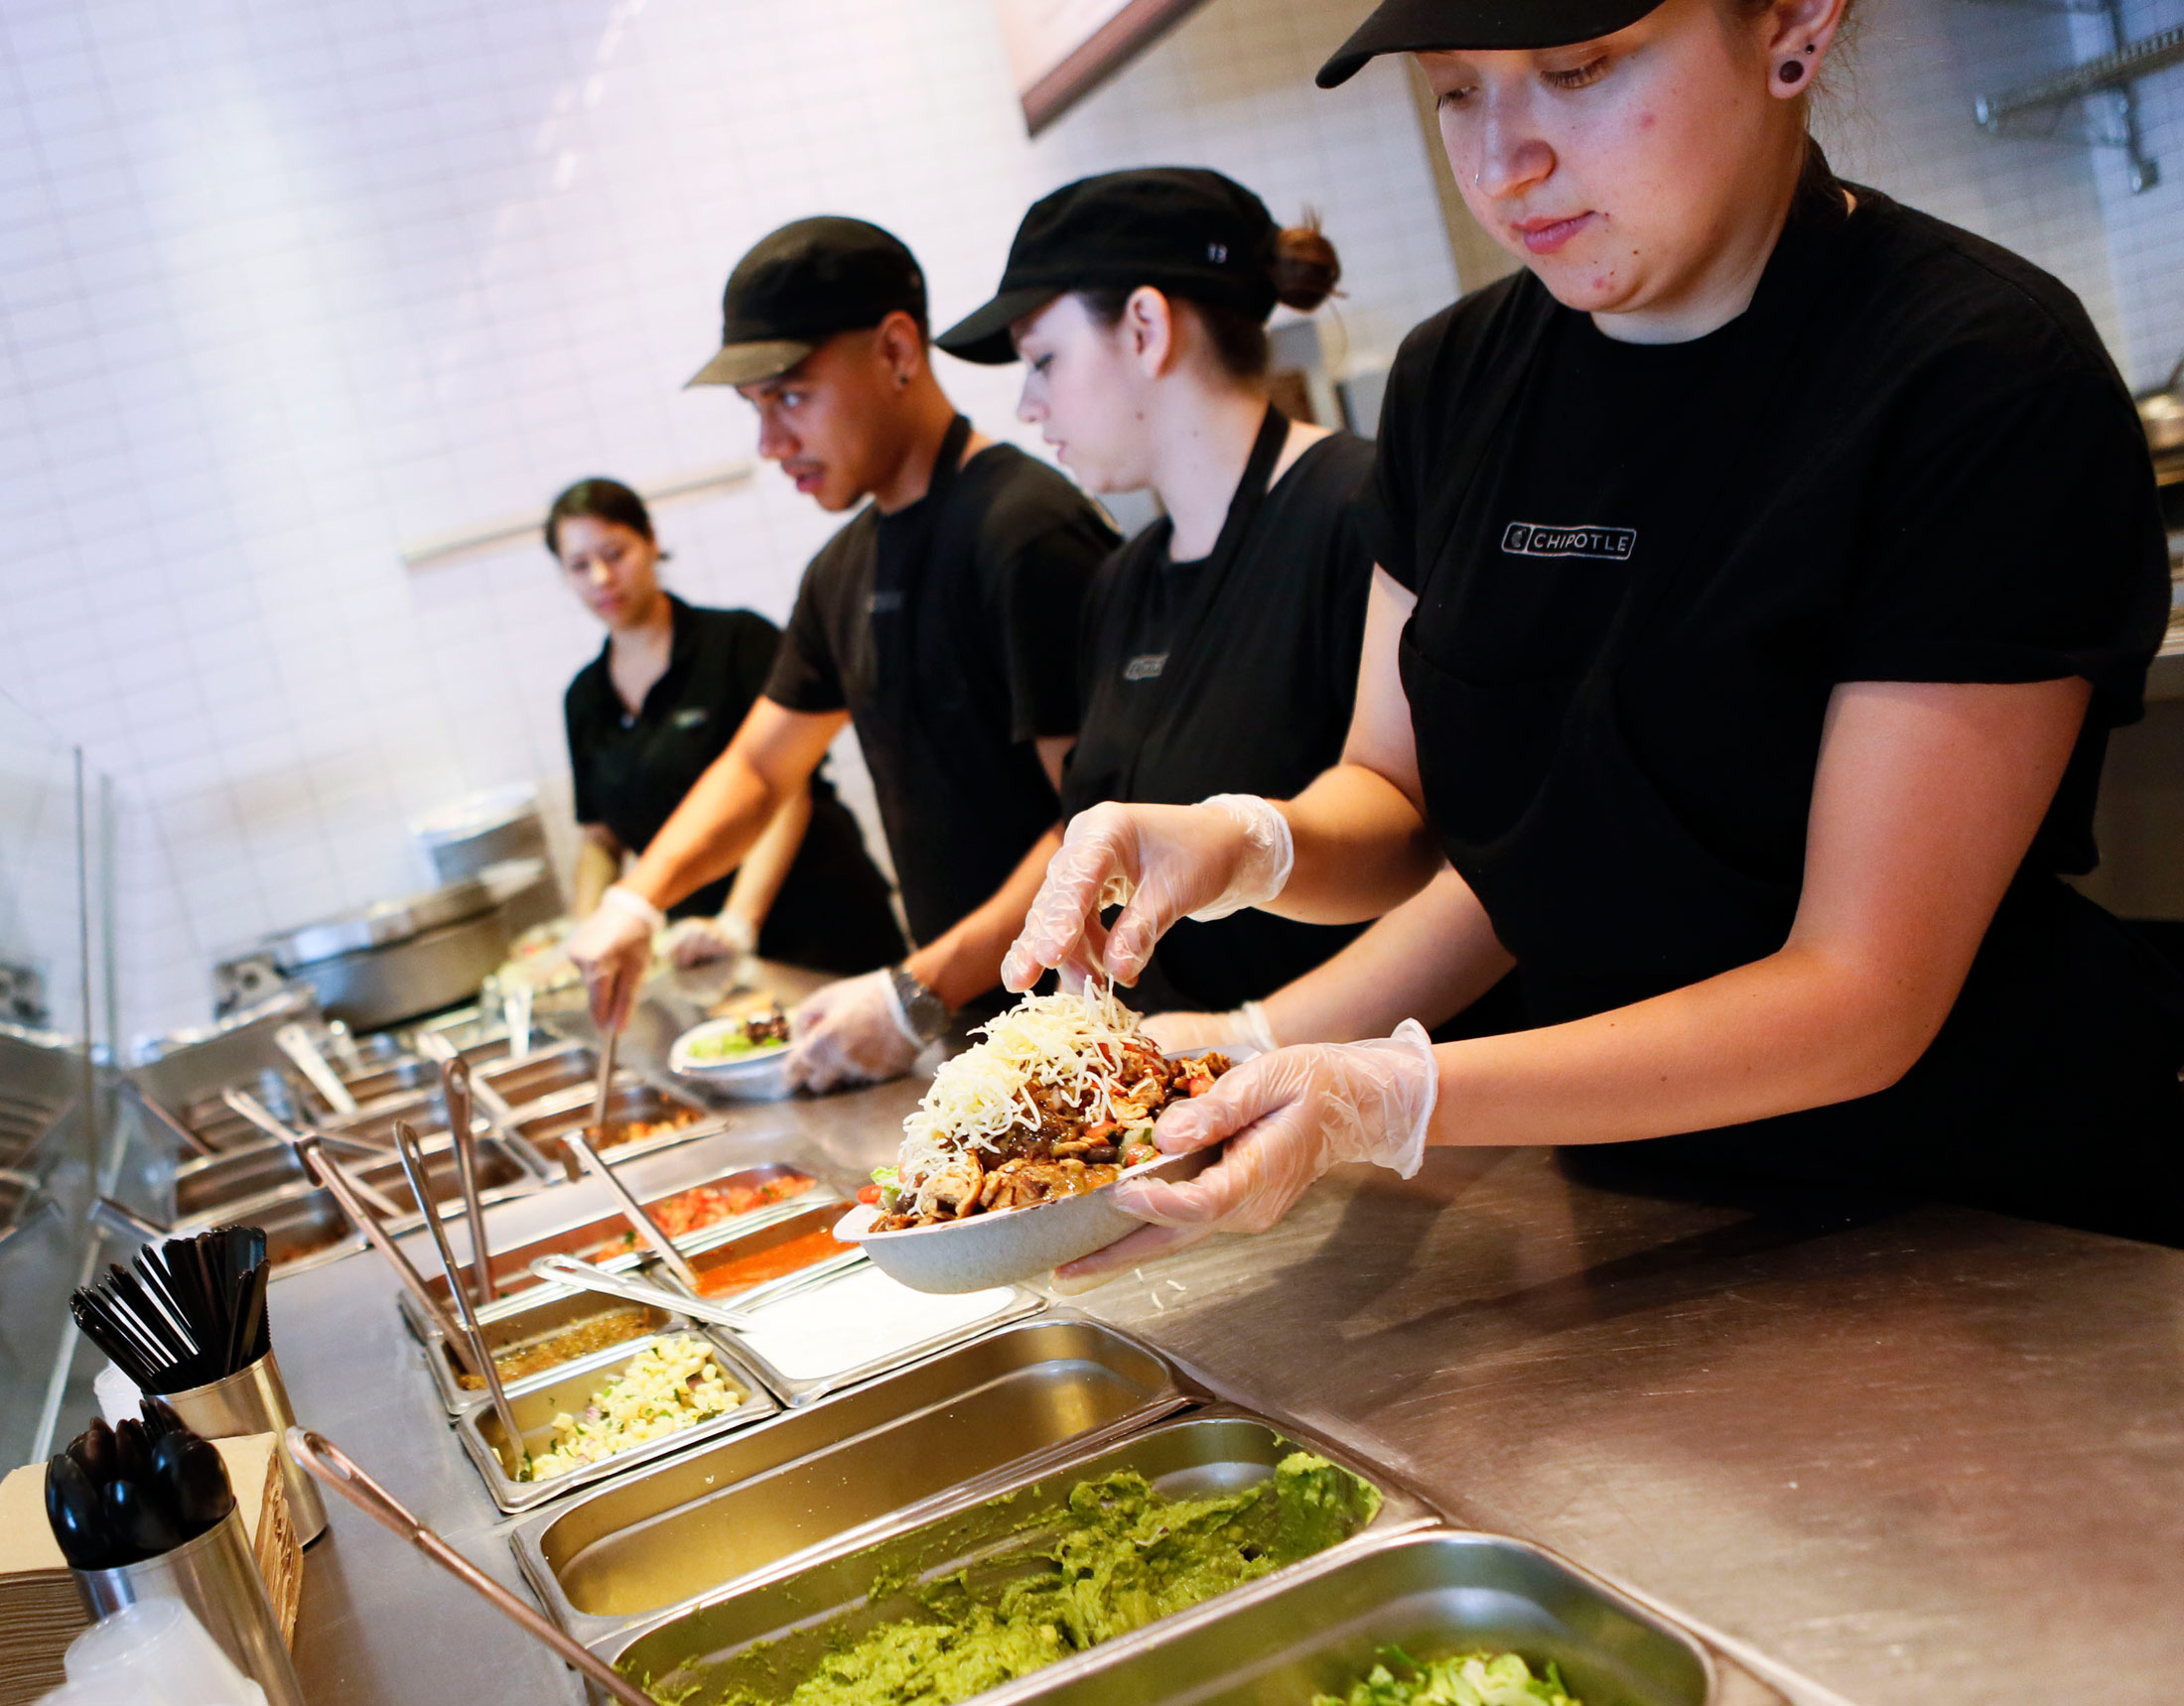 Employees prepare orders at a Chipotle Mexican Grill in Hollywood, California.
